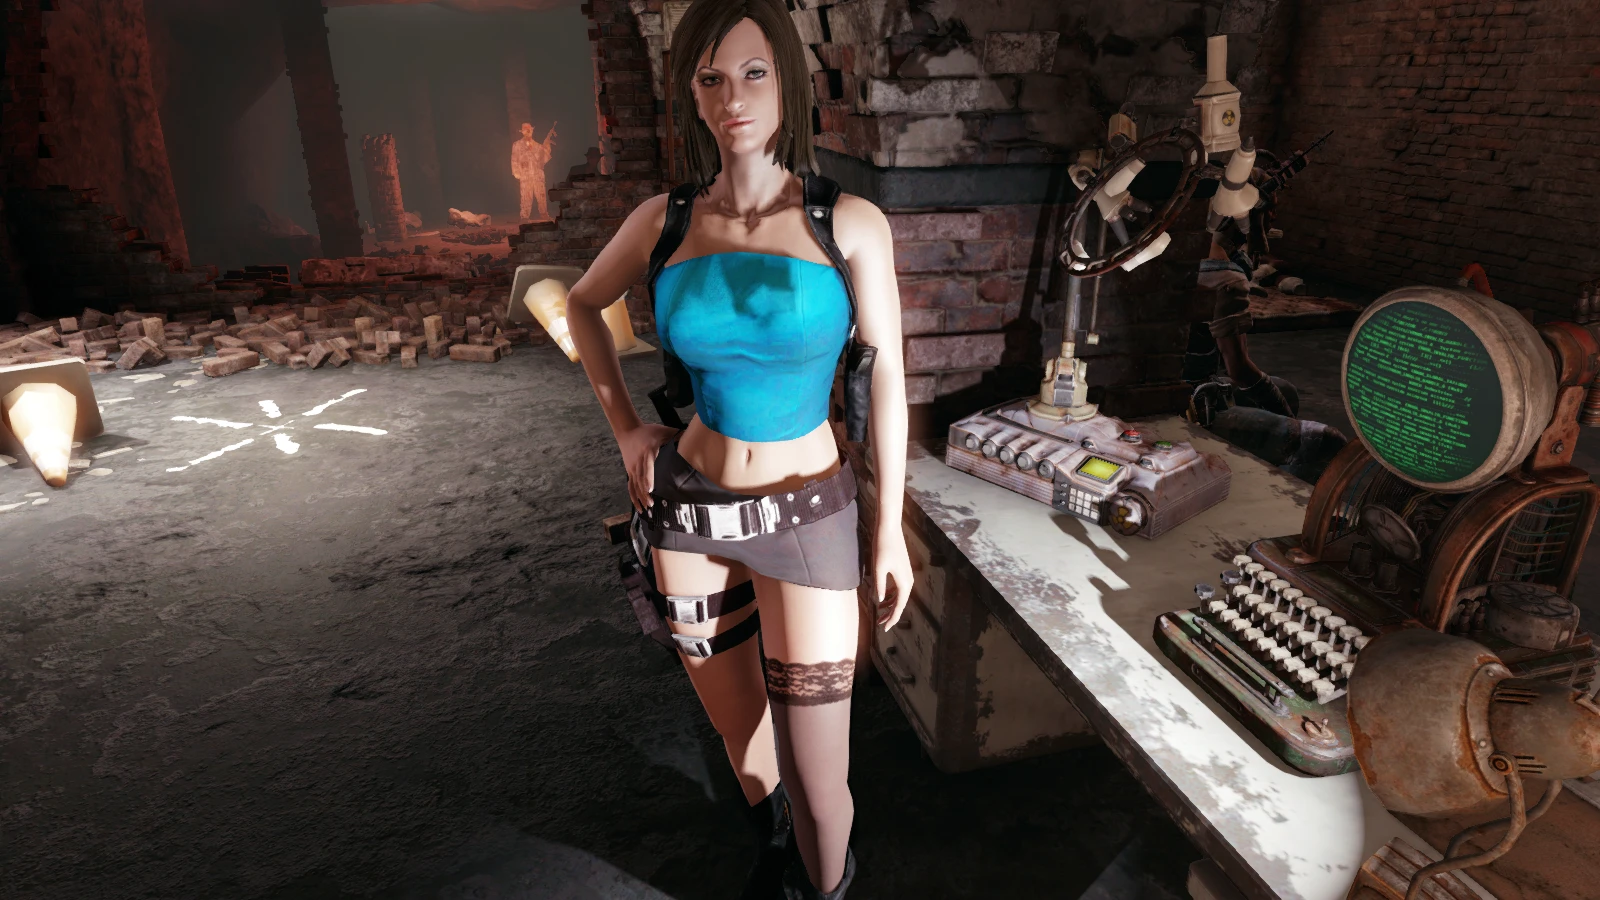 Gallery of Fallout 4 Outfit Mods.